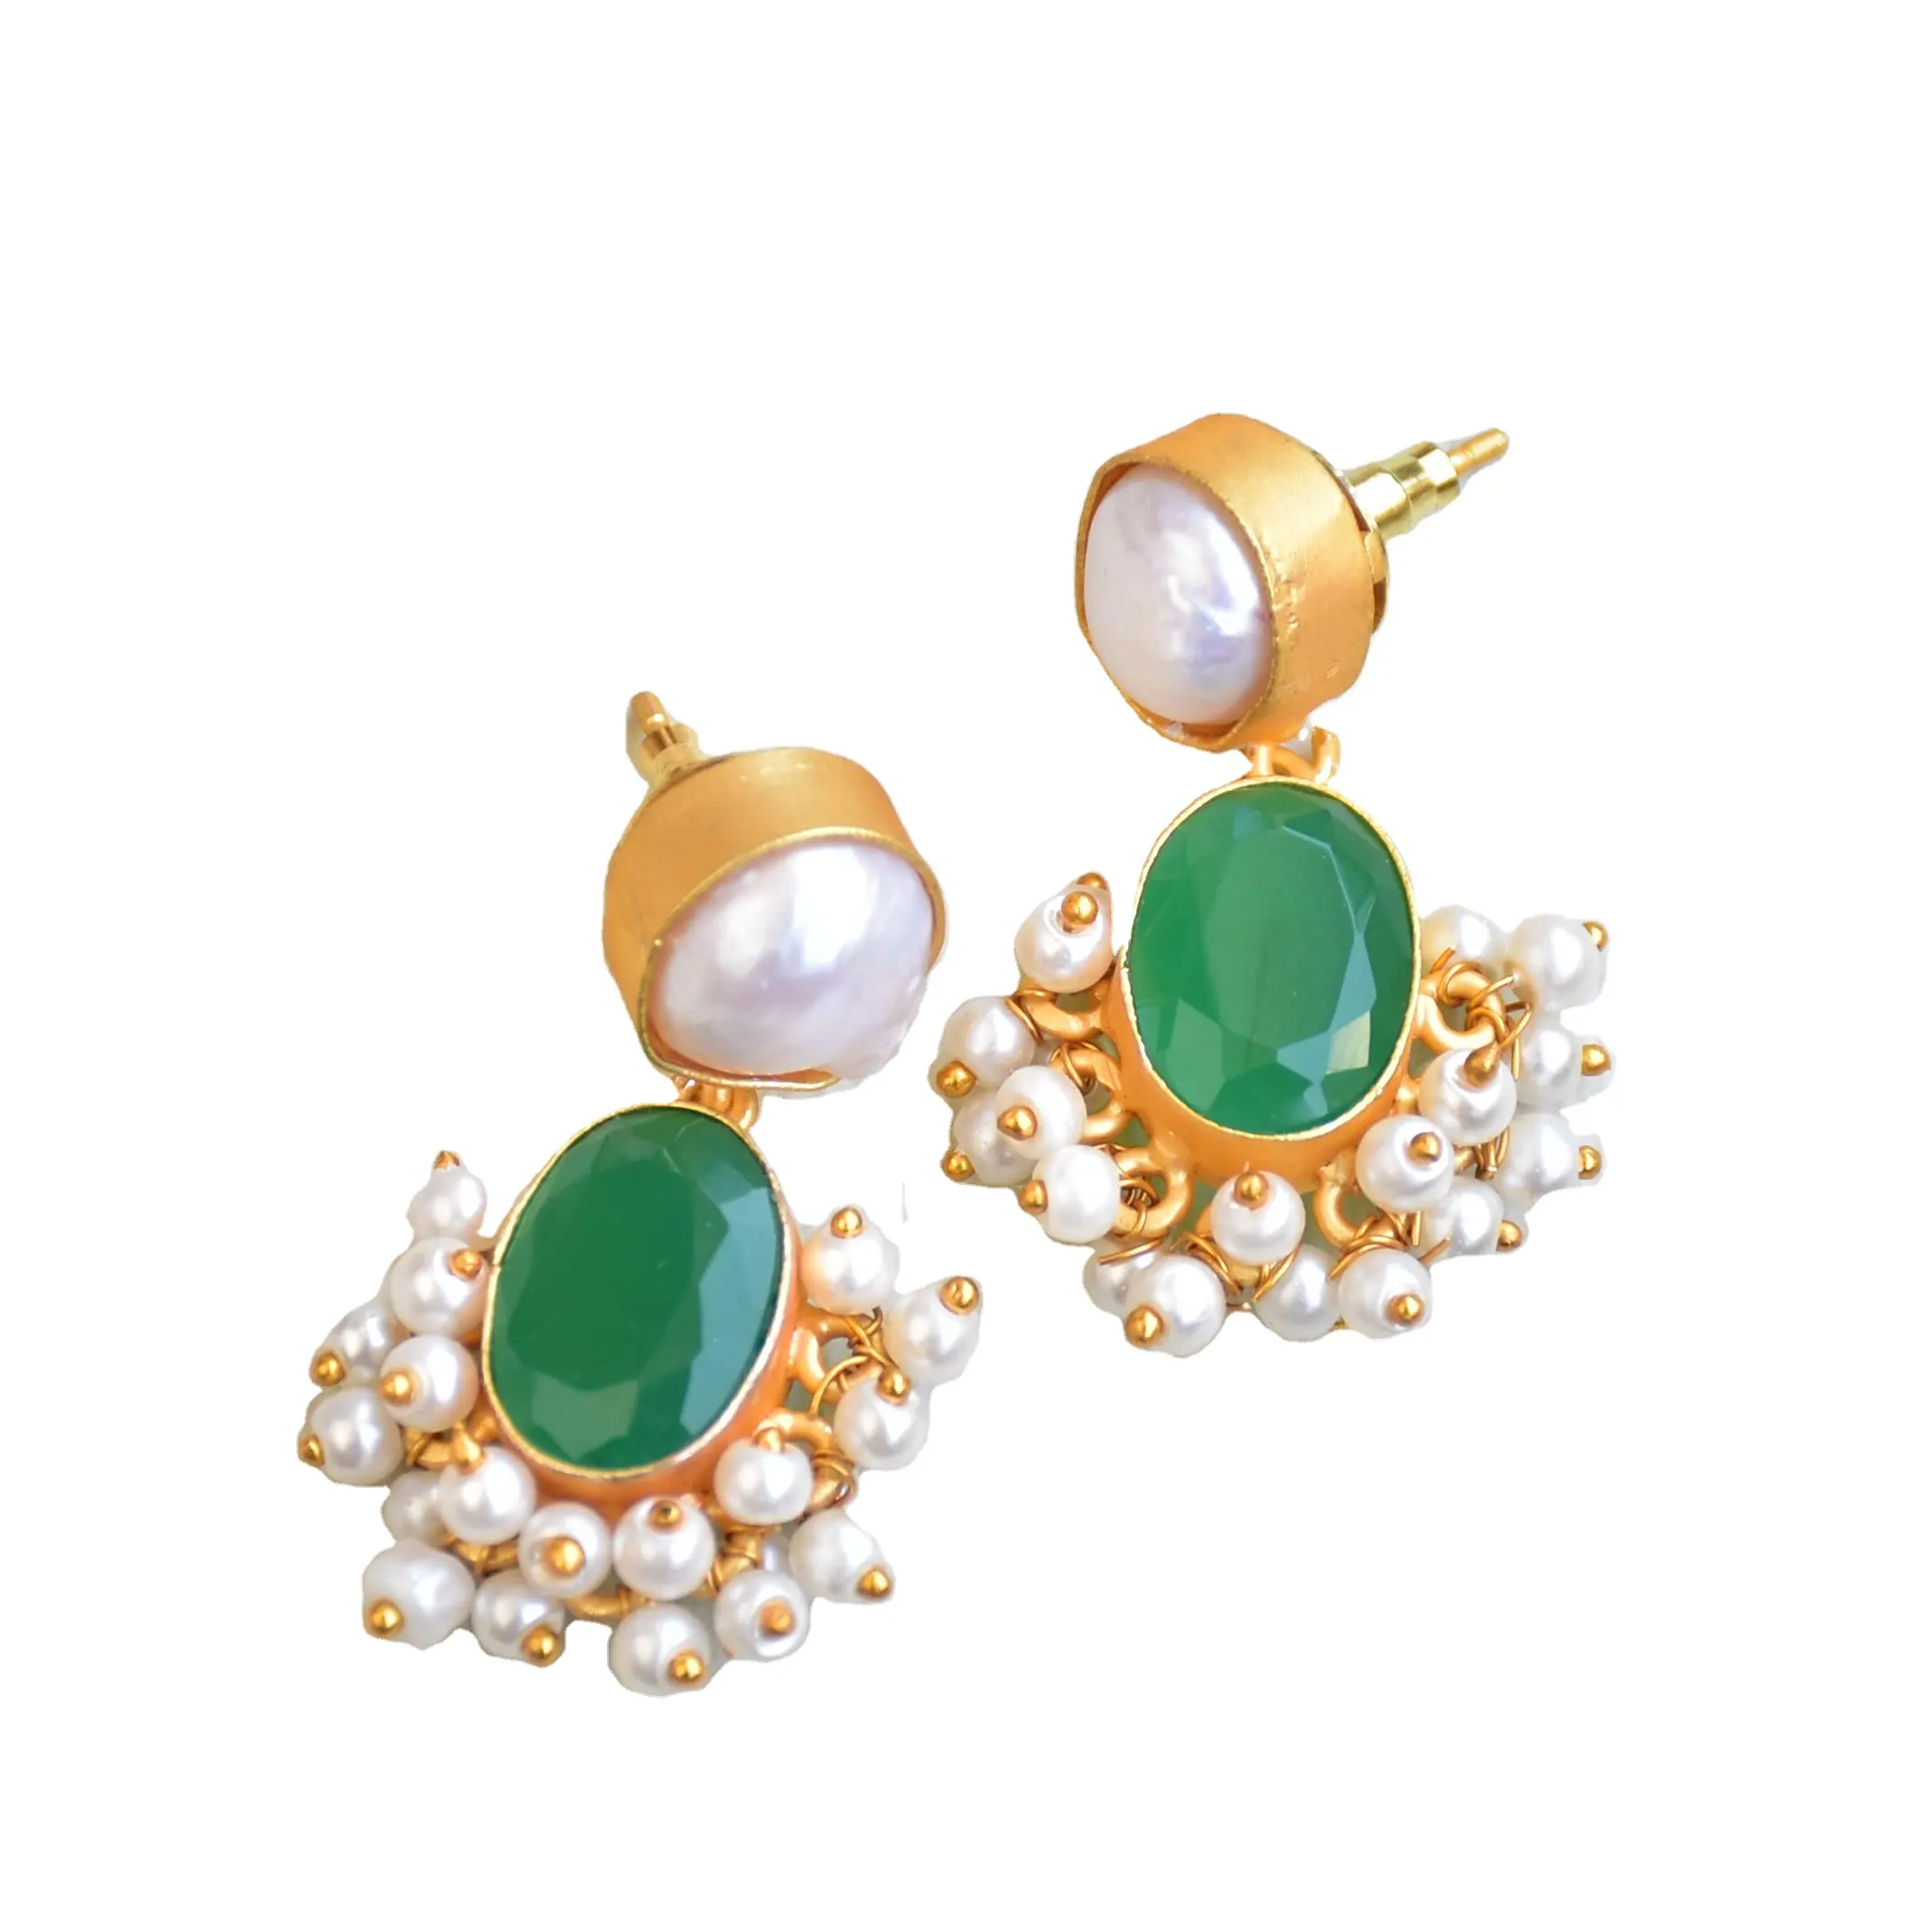 Bridal modern drop earrings Freshwater Pearl dangling green earring Indian suppliers and wholesale wedding 18k gold jewelry